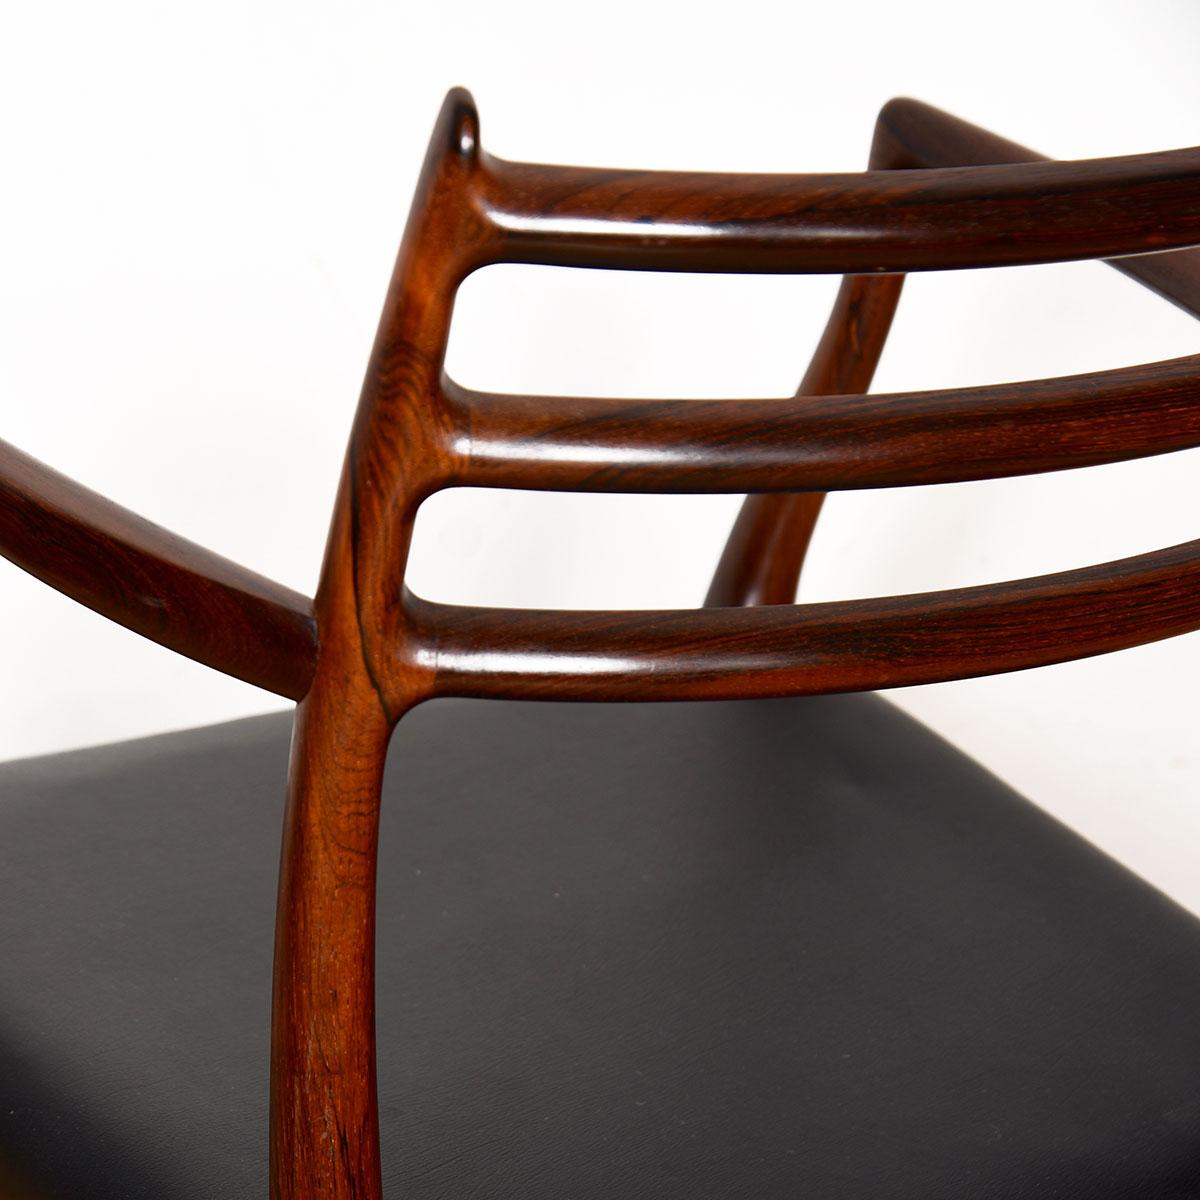 Pair of Moller Danish Horn Arm-Chairs #62 in Brazilian Rosewood For Sale 2